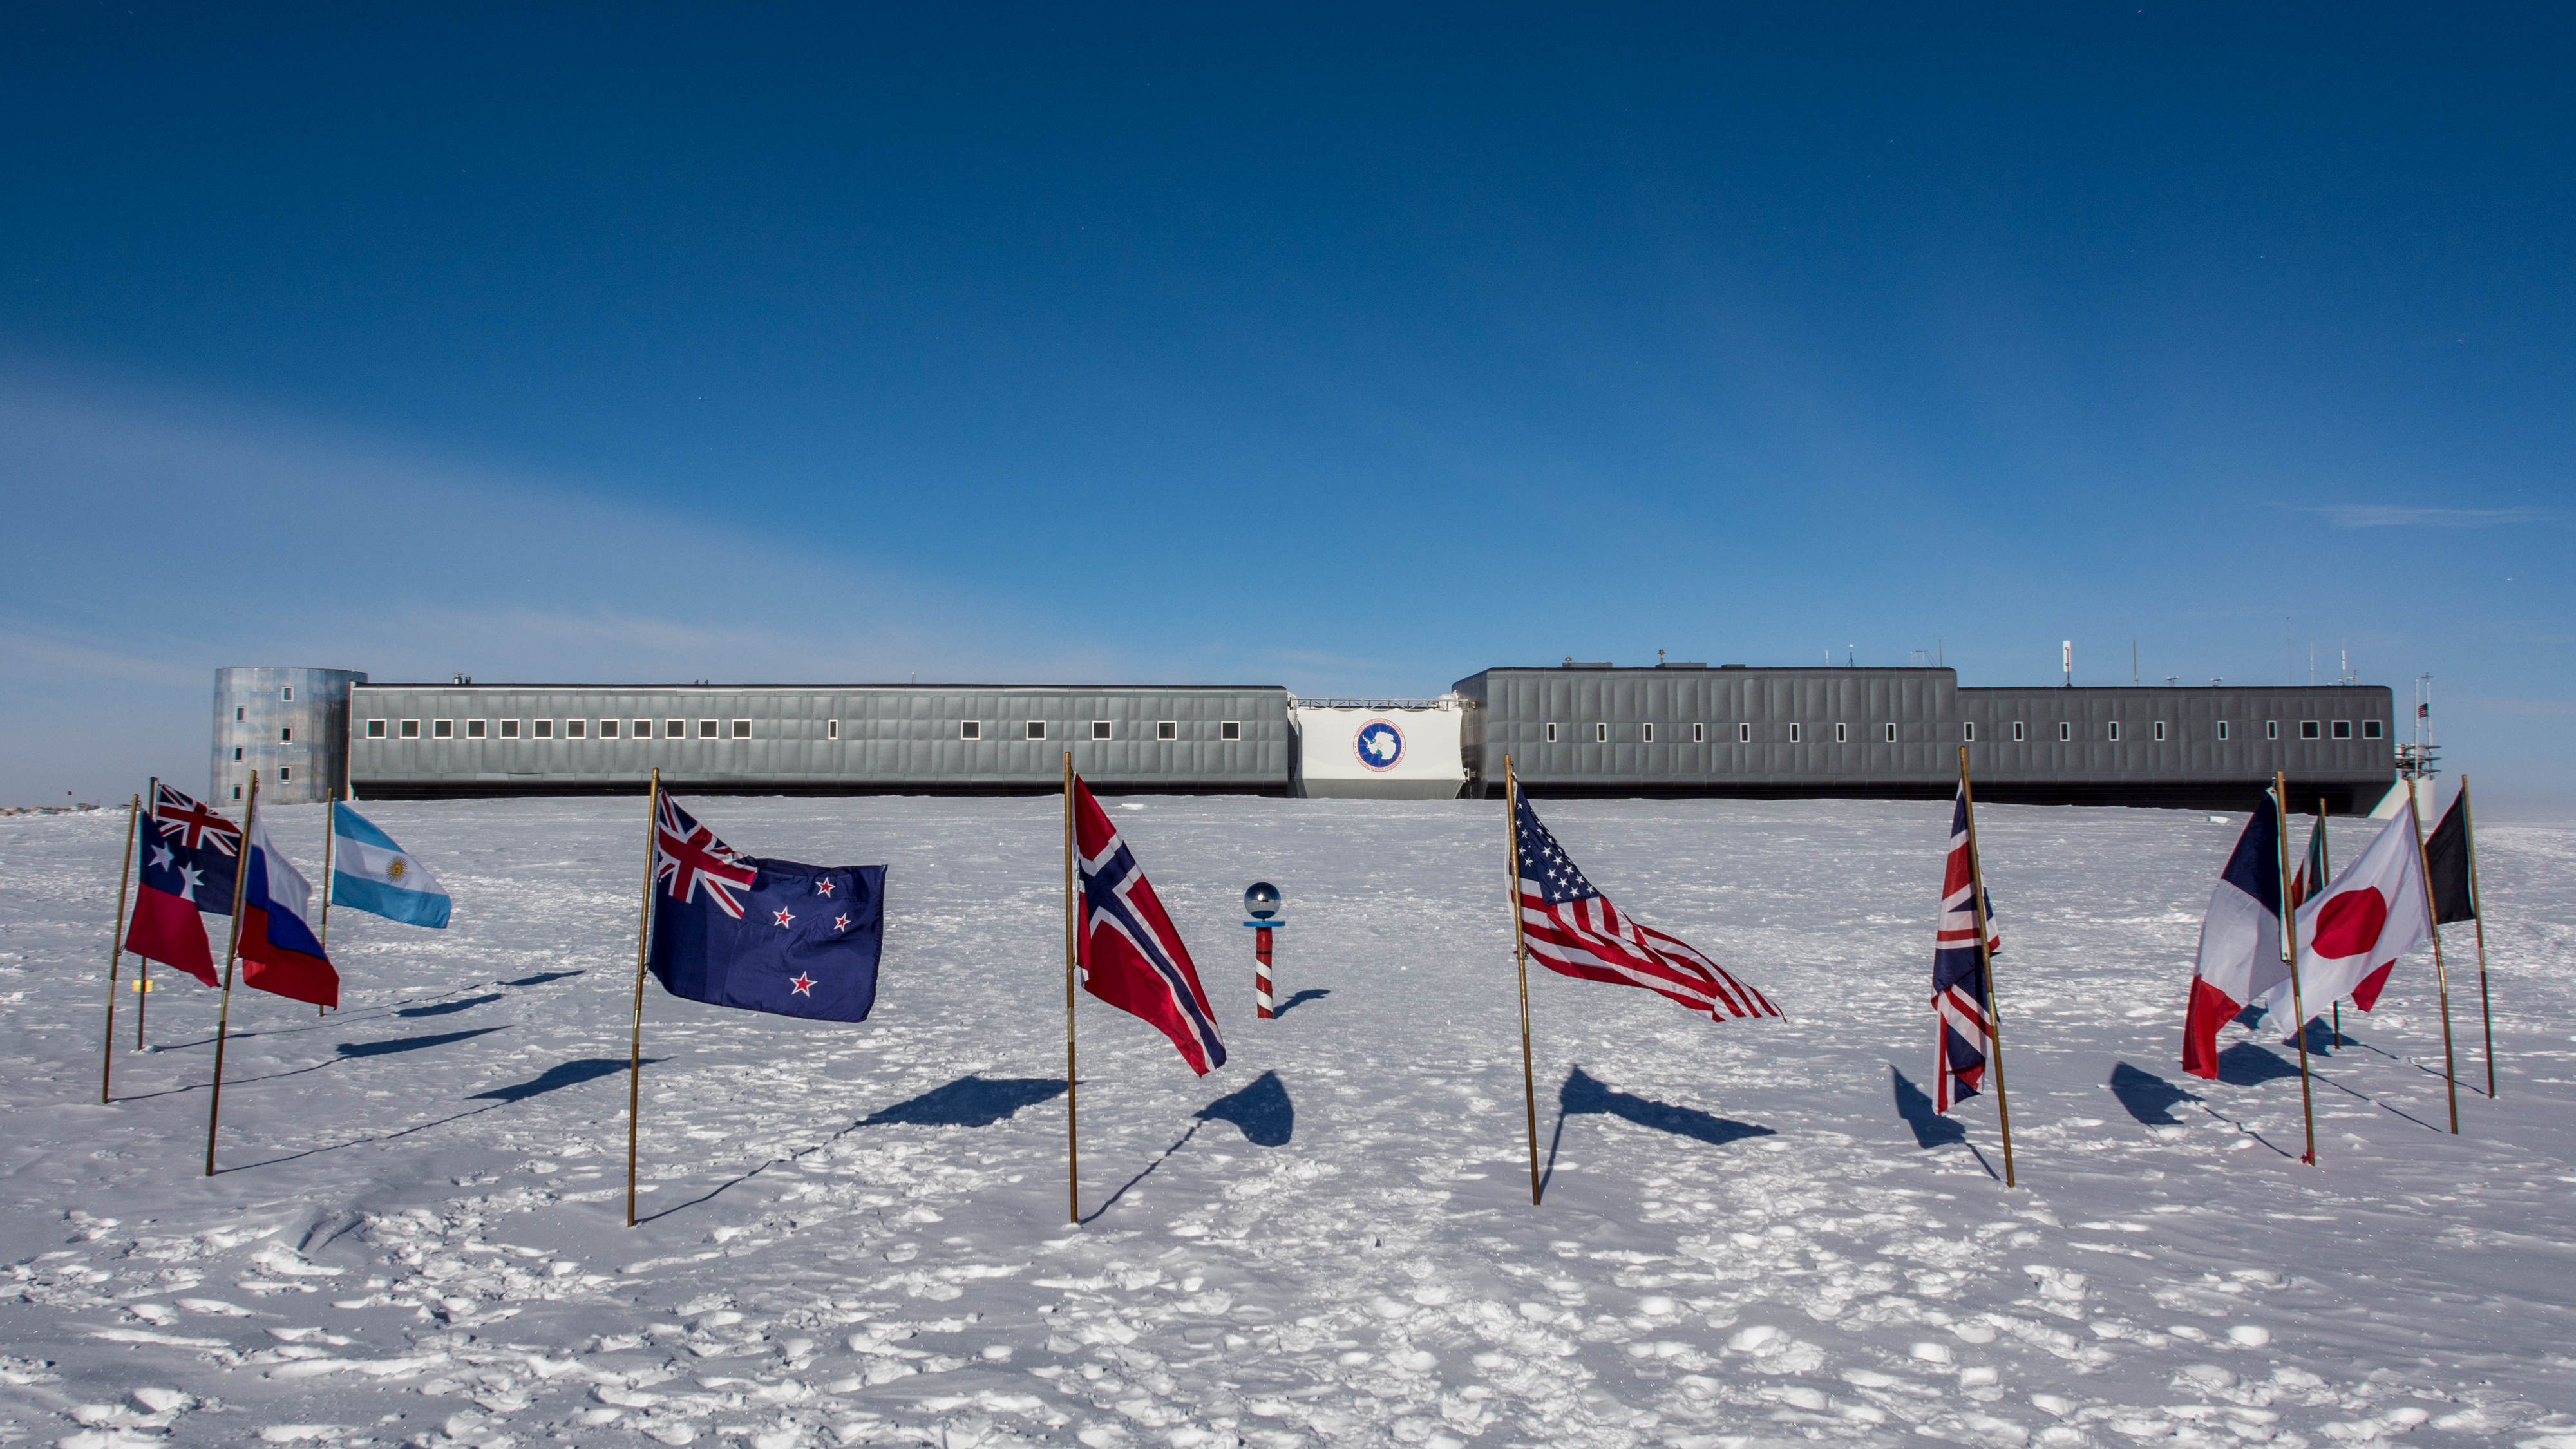 Flags surround a pole with a building in the background on a snowy landscape.